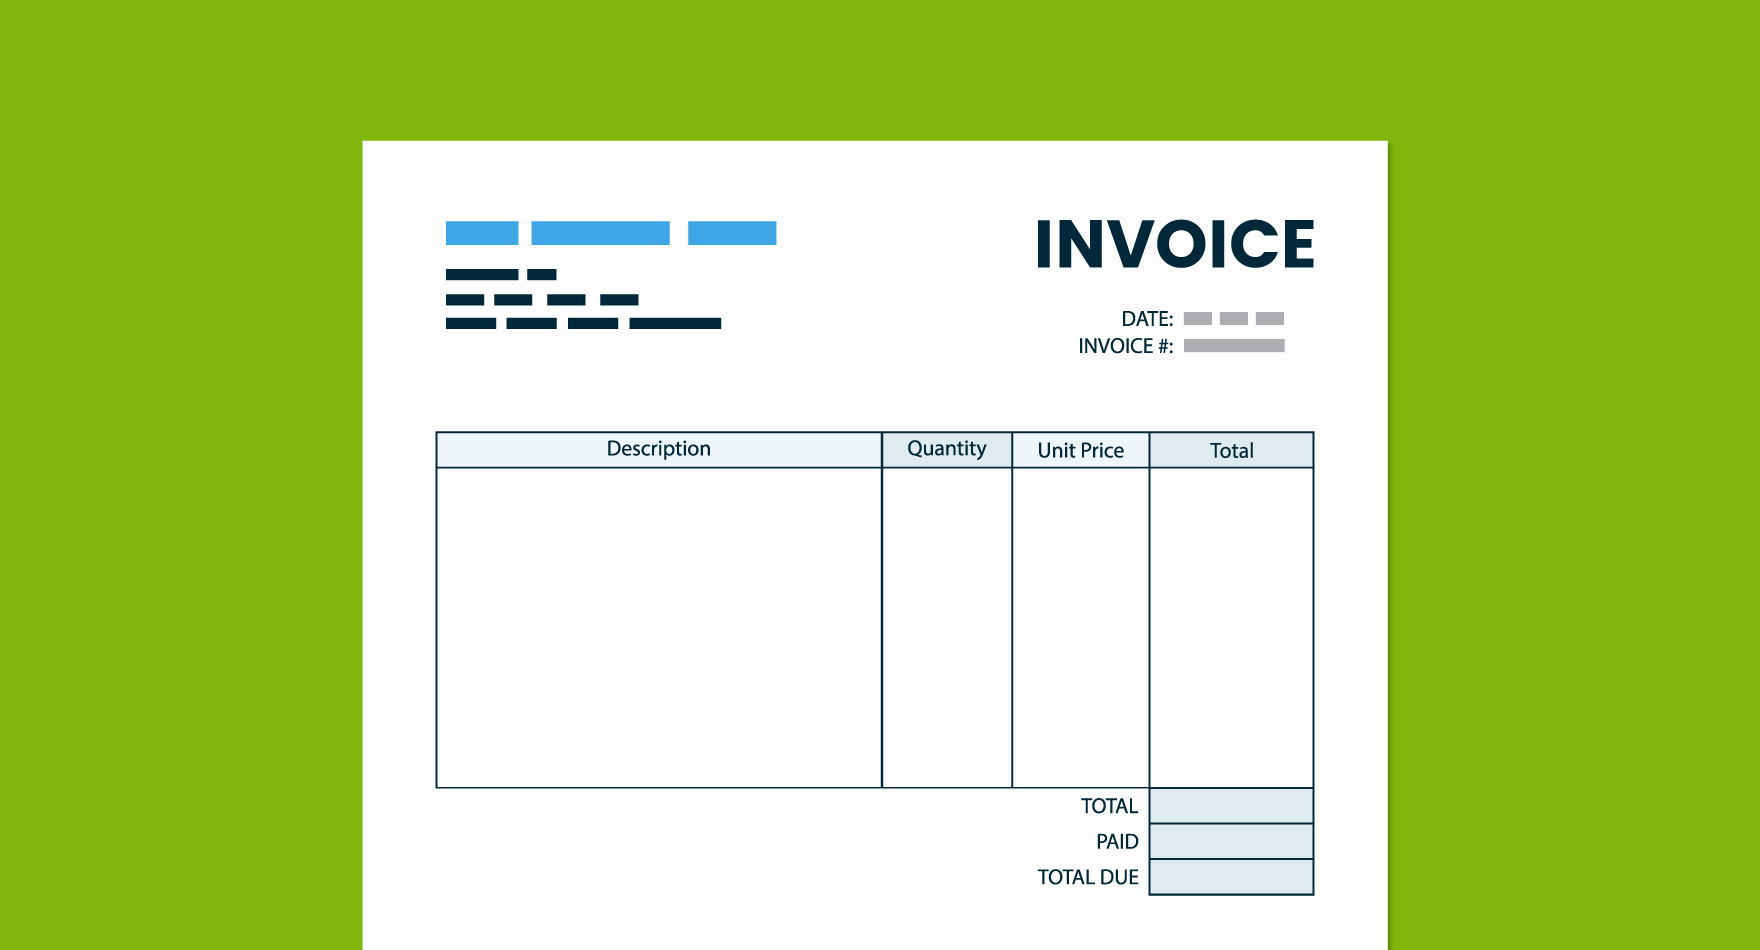 Service Invoice Template Free Inspirational Back to Basics Invoices and the Invoicing Process